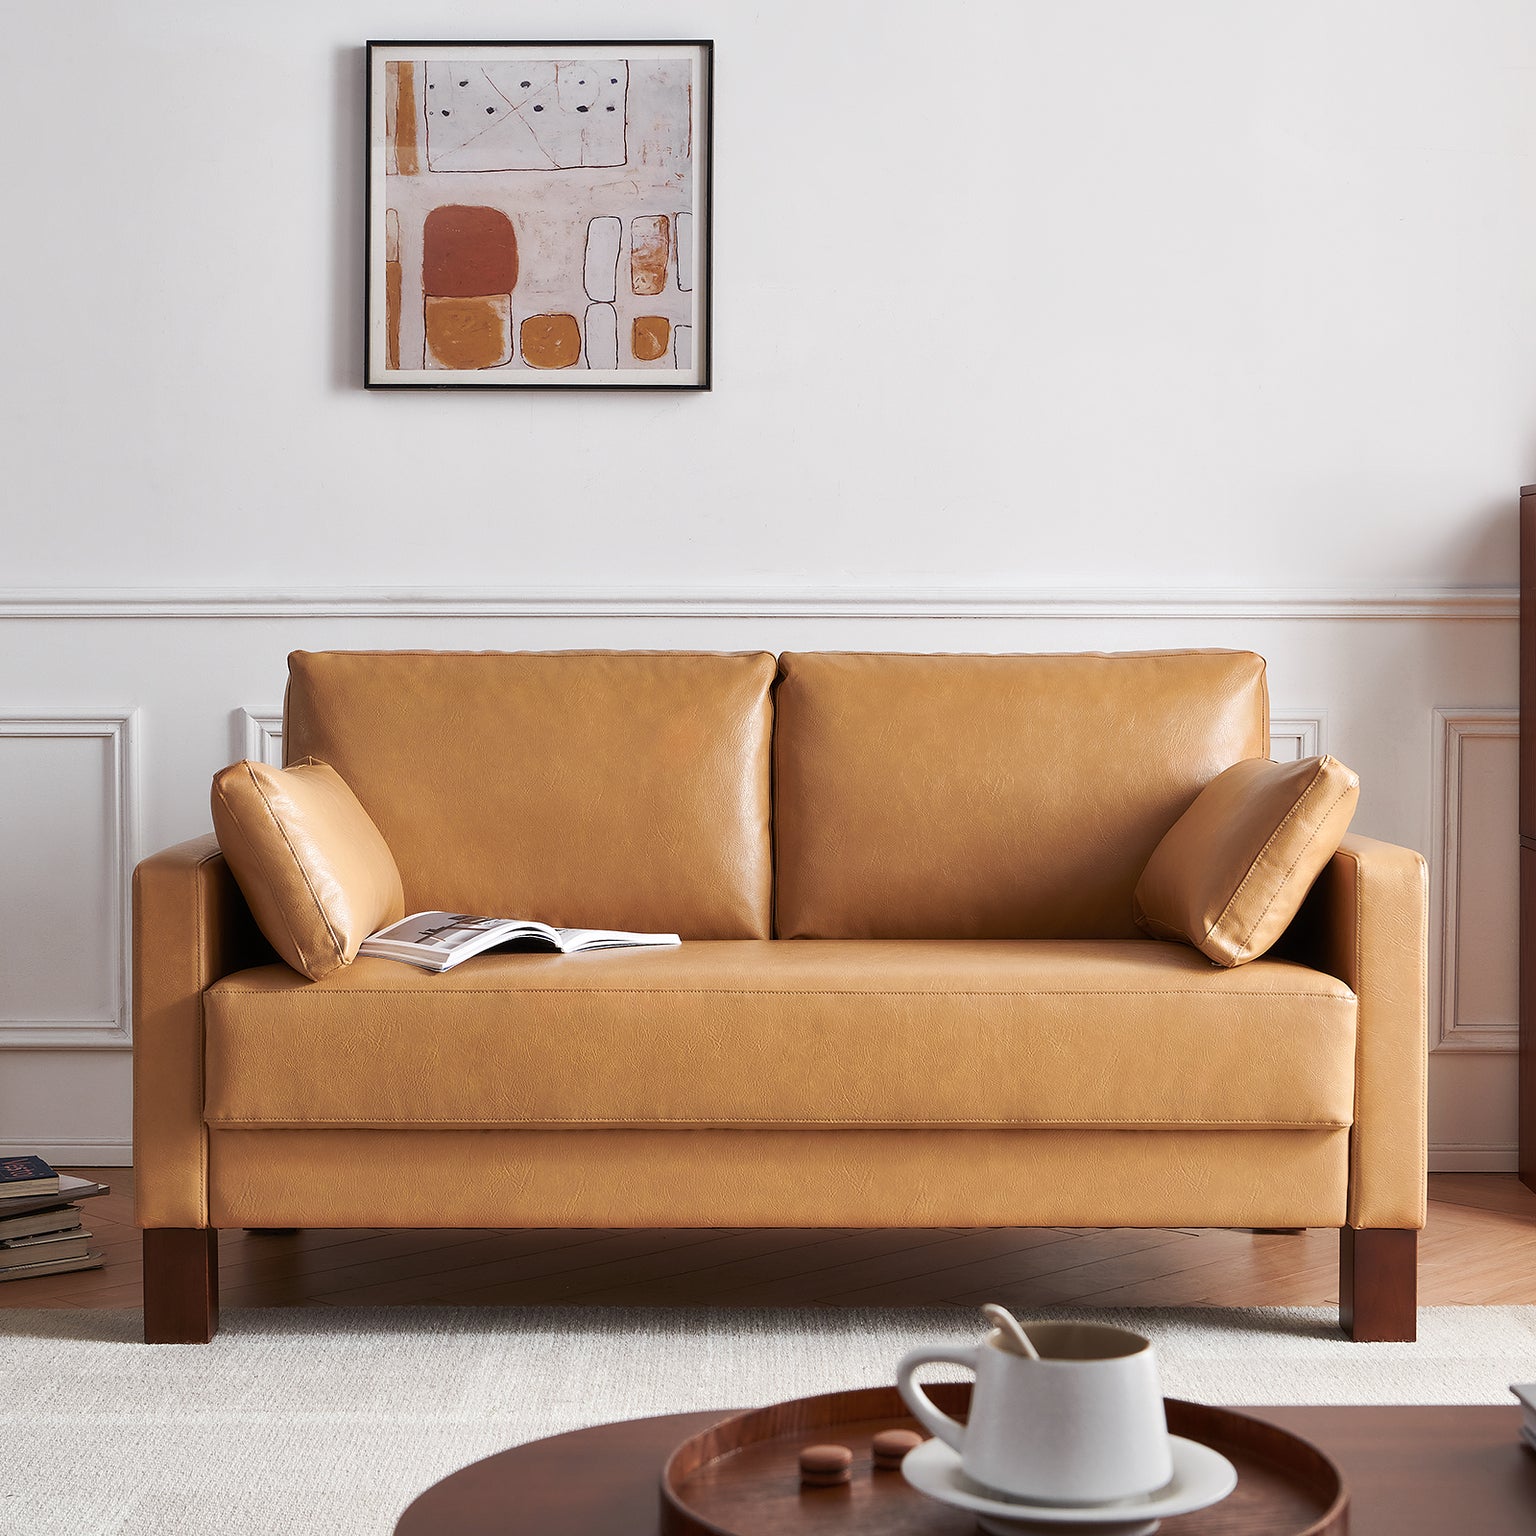 Serena Sofa, Classic Faux Leather Loveseat with Thick Cushion and wooden legs, Tan, 56'', 66'' or set